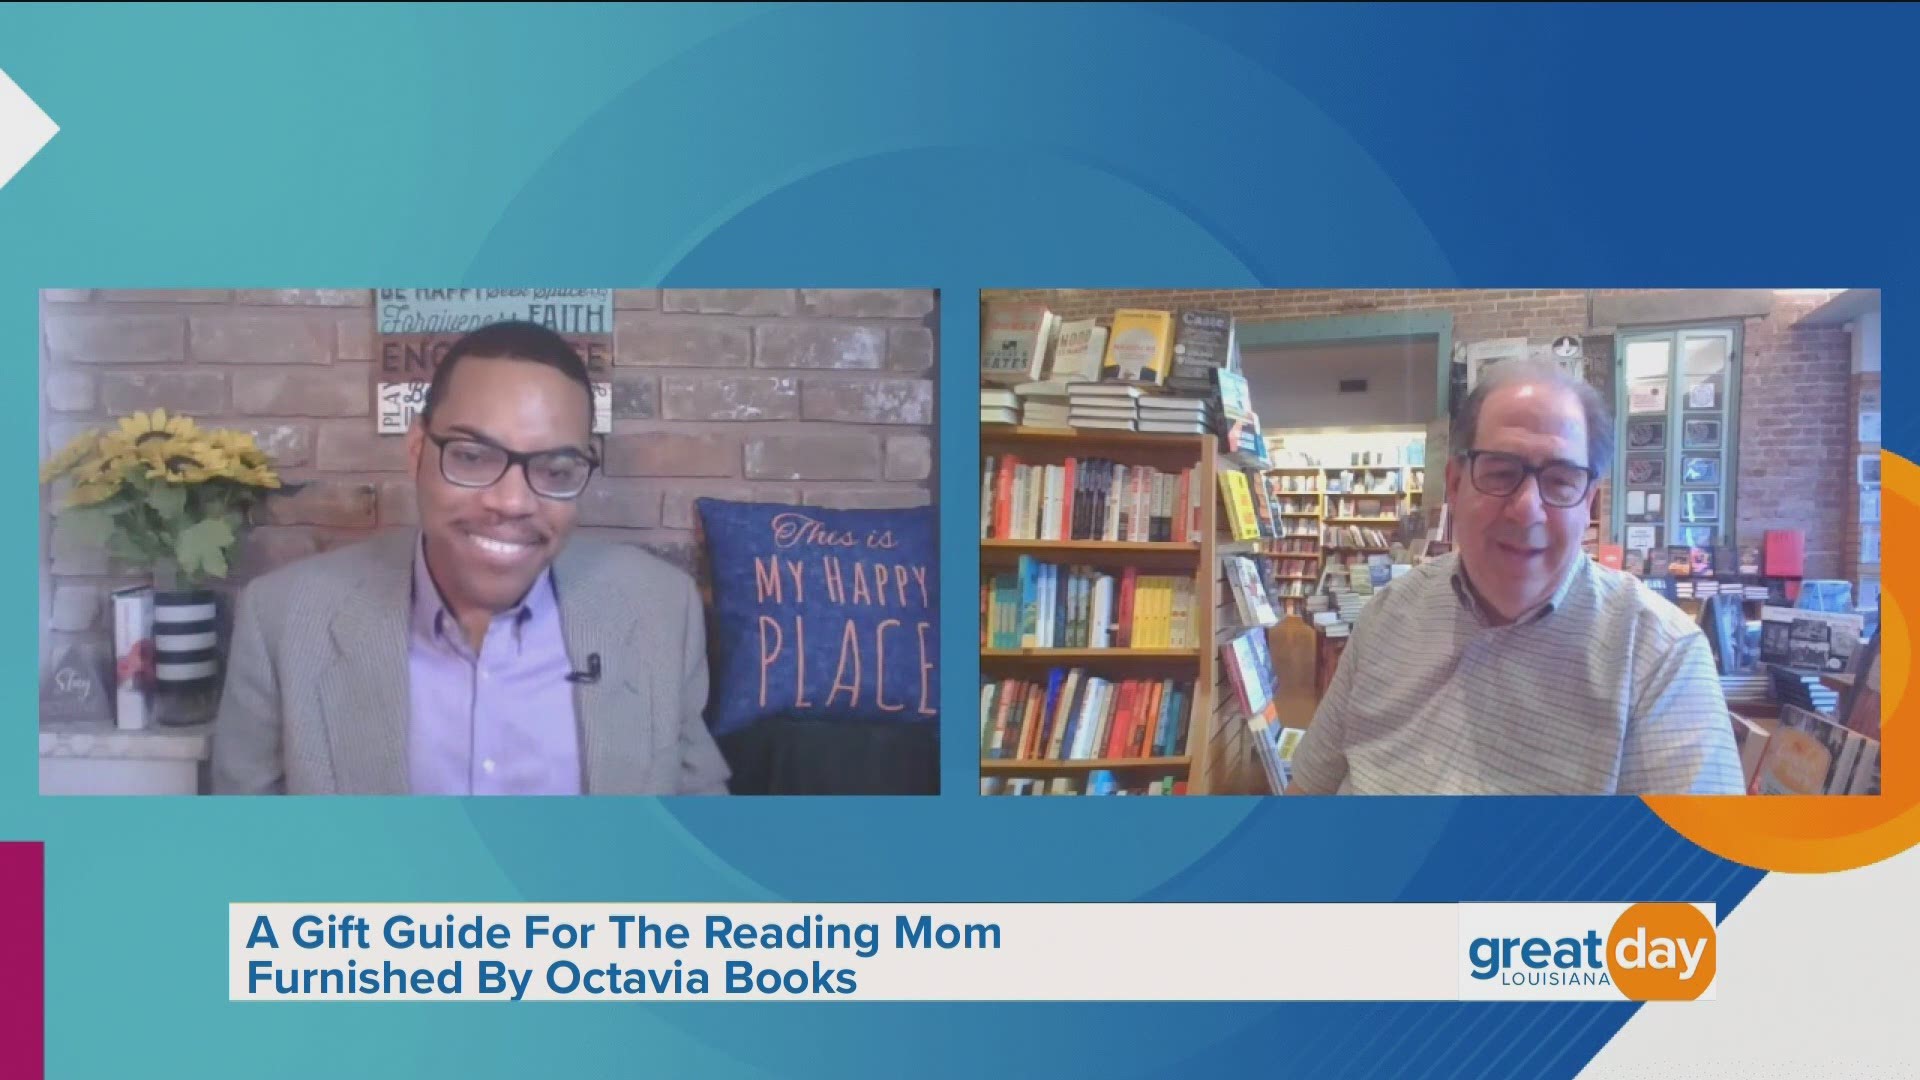 The co-owner of Octavia Books shared book recommendations for Mother's Day.